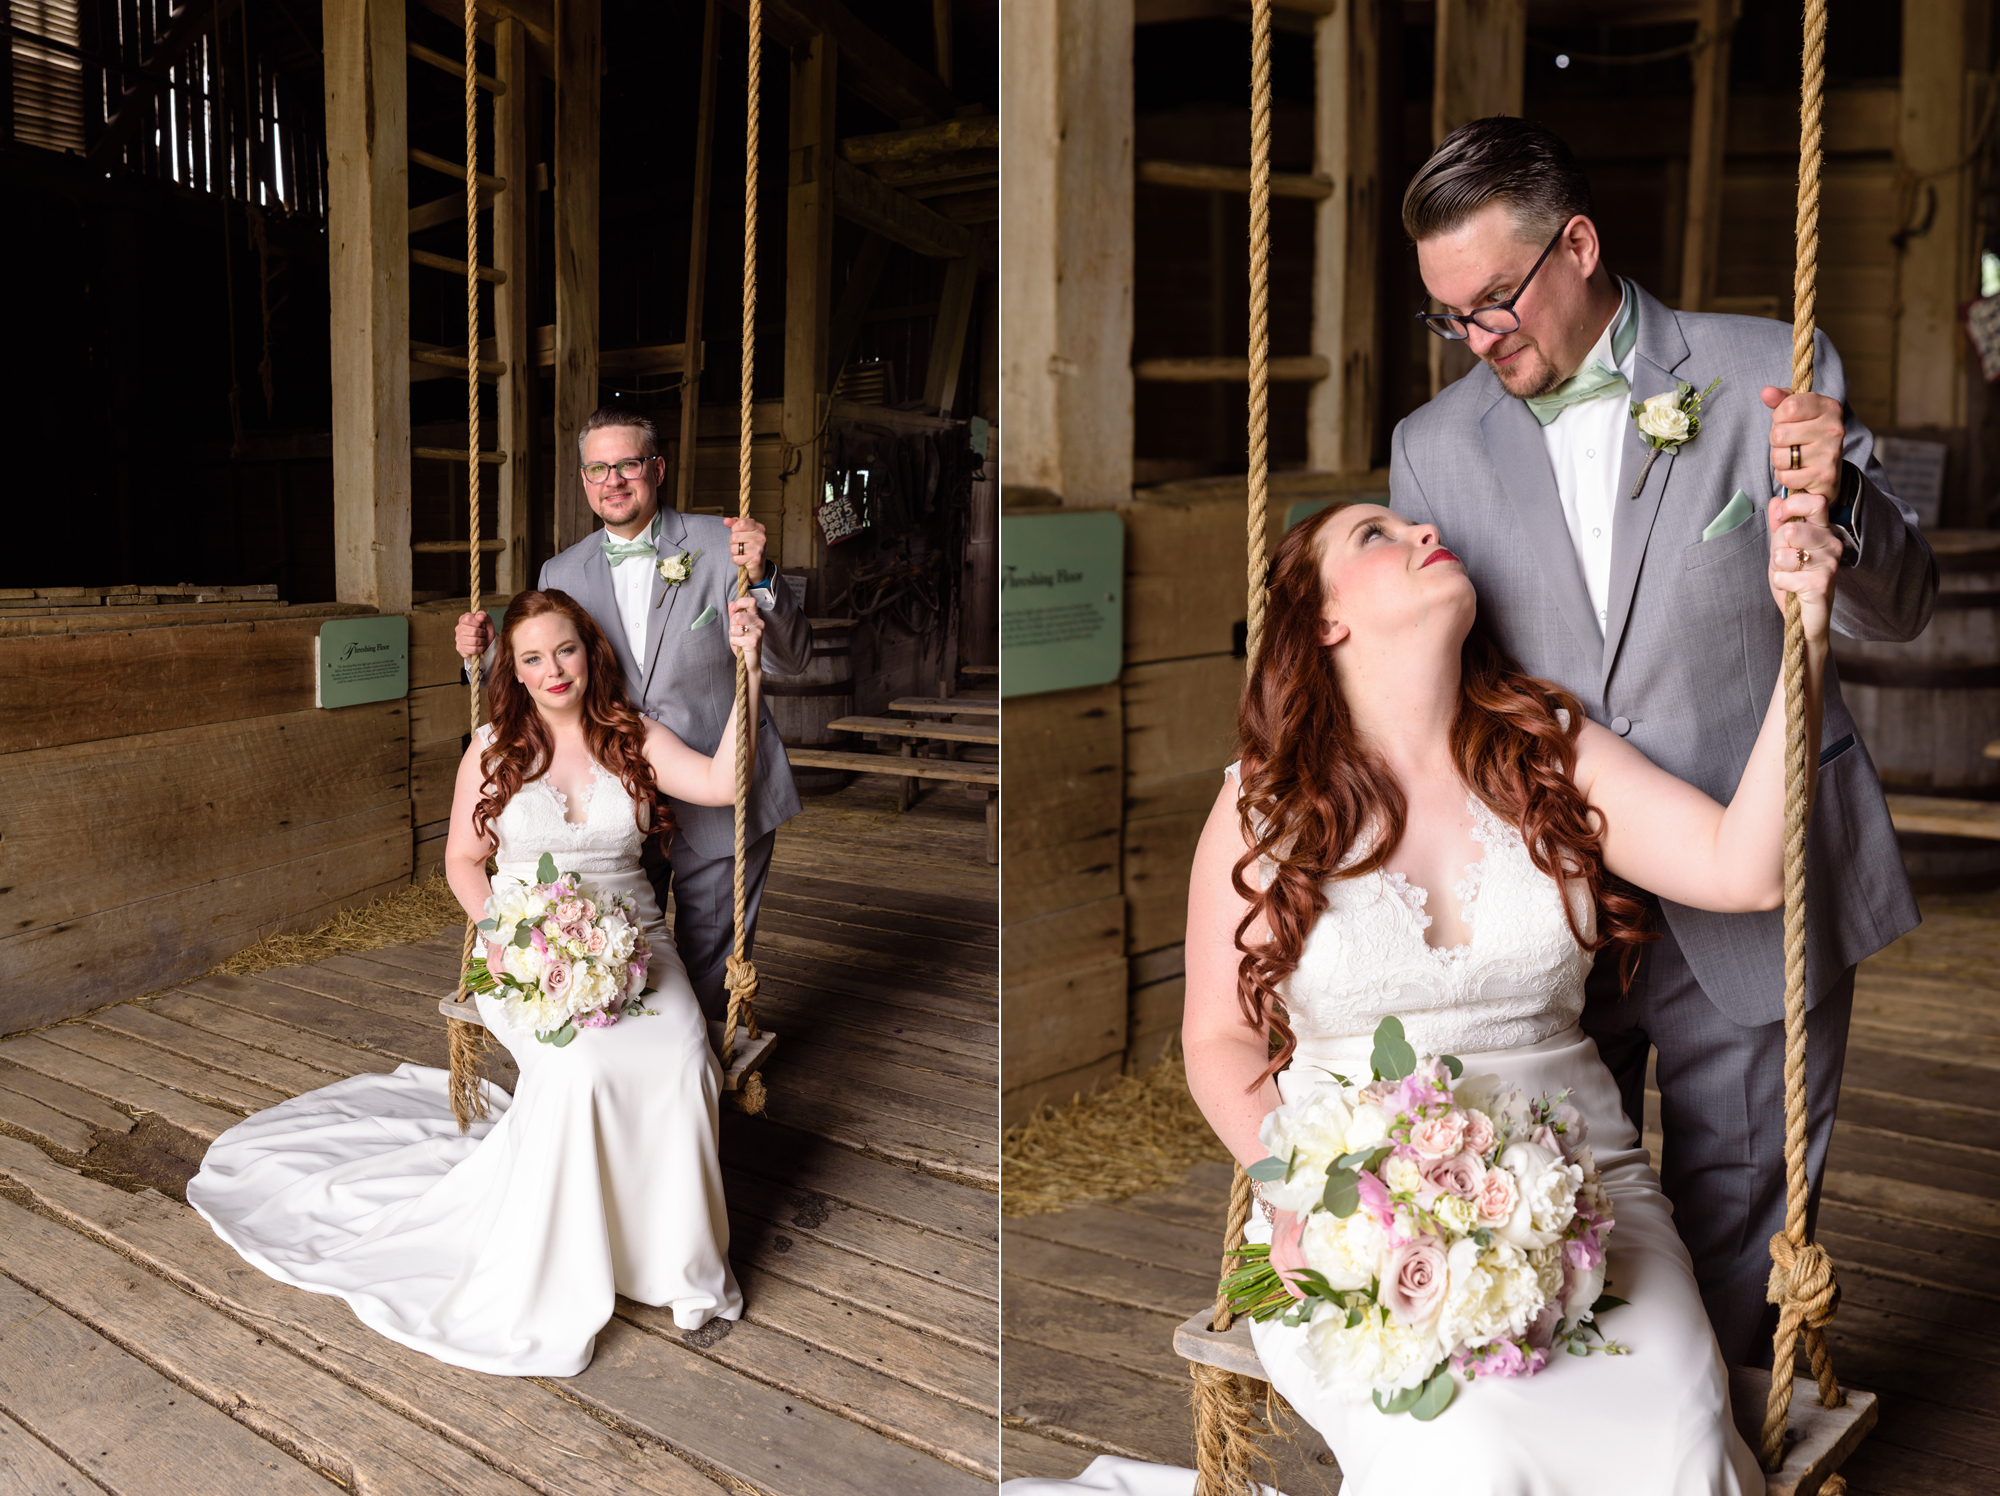 Bride & Groom portraits before their wedding at Amish Acres